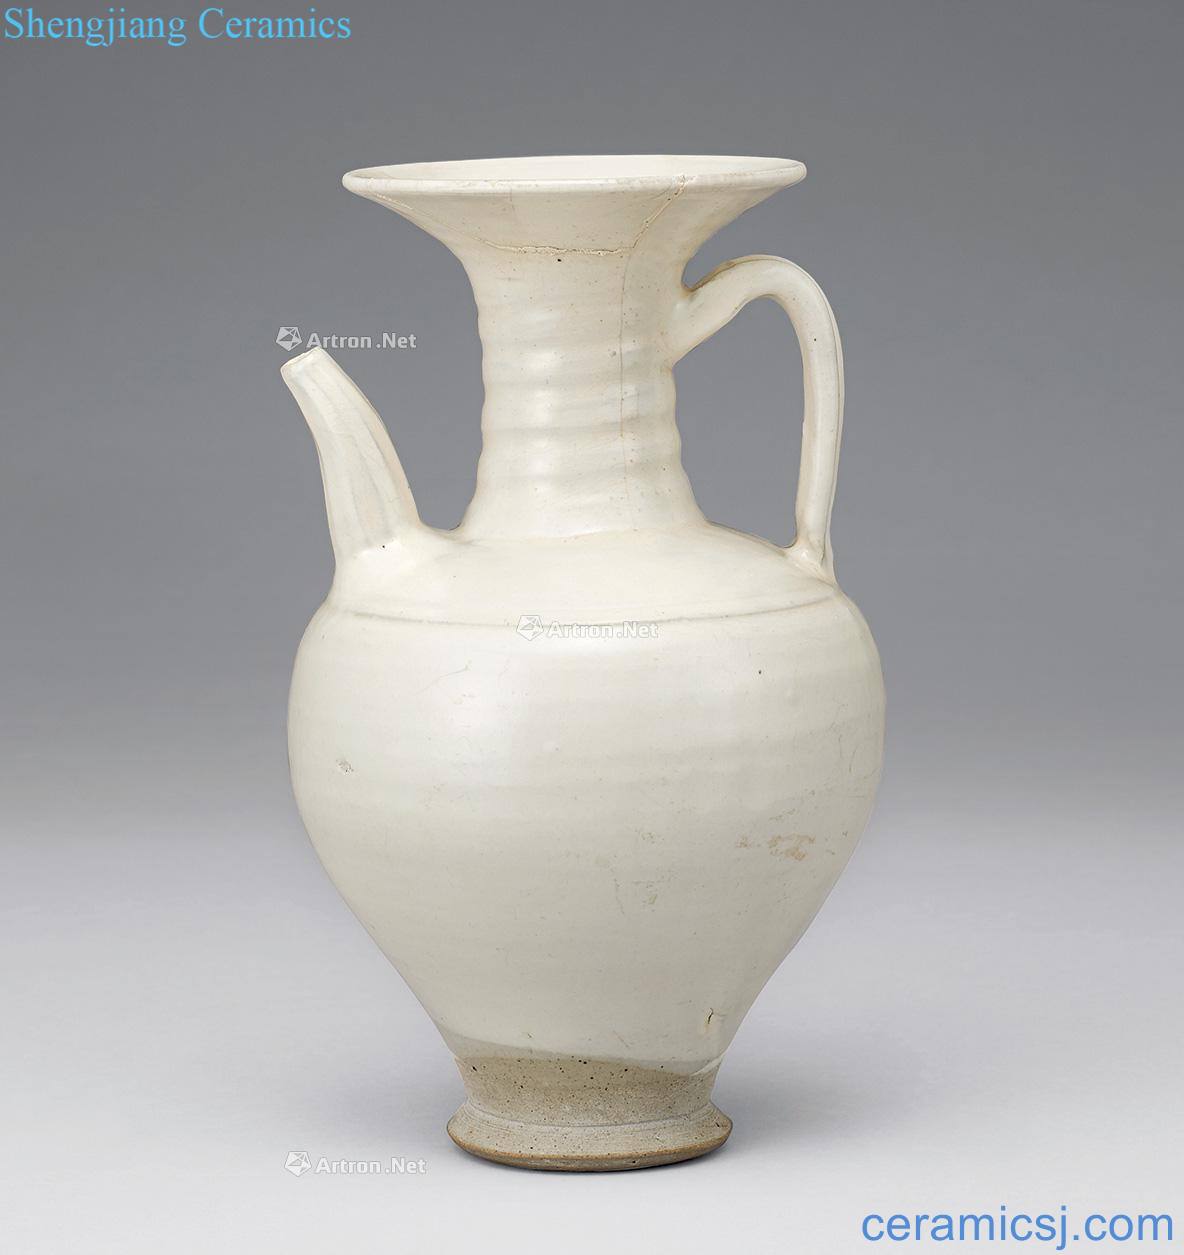 The song dynasty kiln ewer